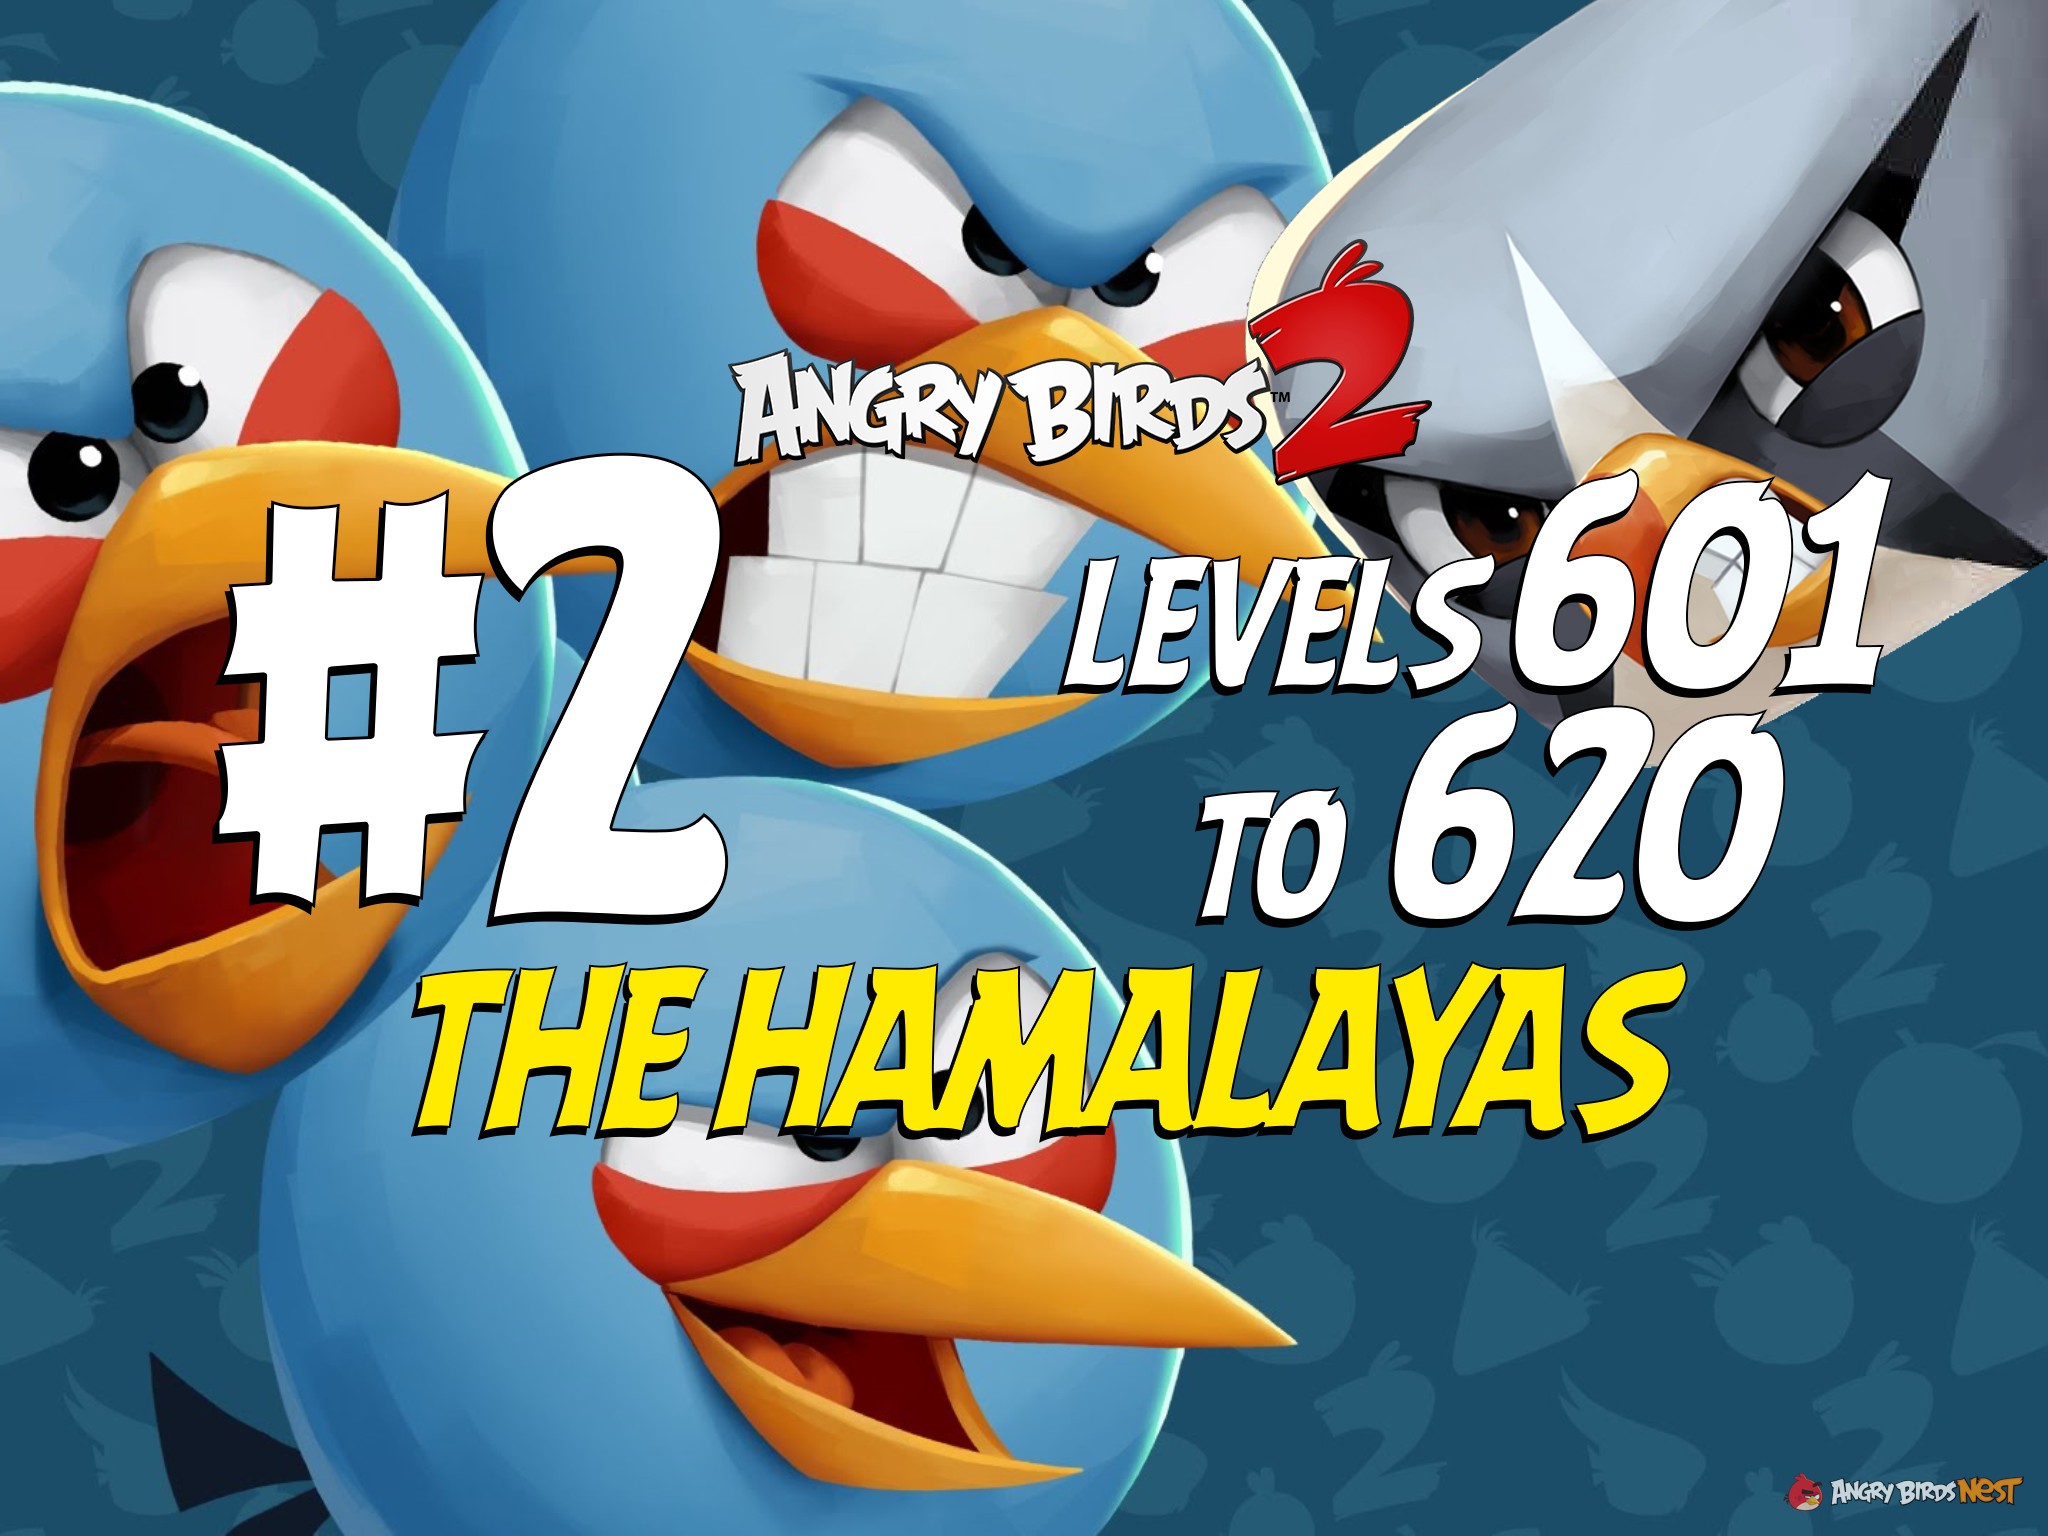 Angry Birds 2 The Hamalayas Levels 601 to 620 Part 2 Compilation